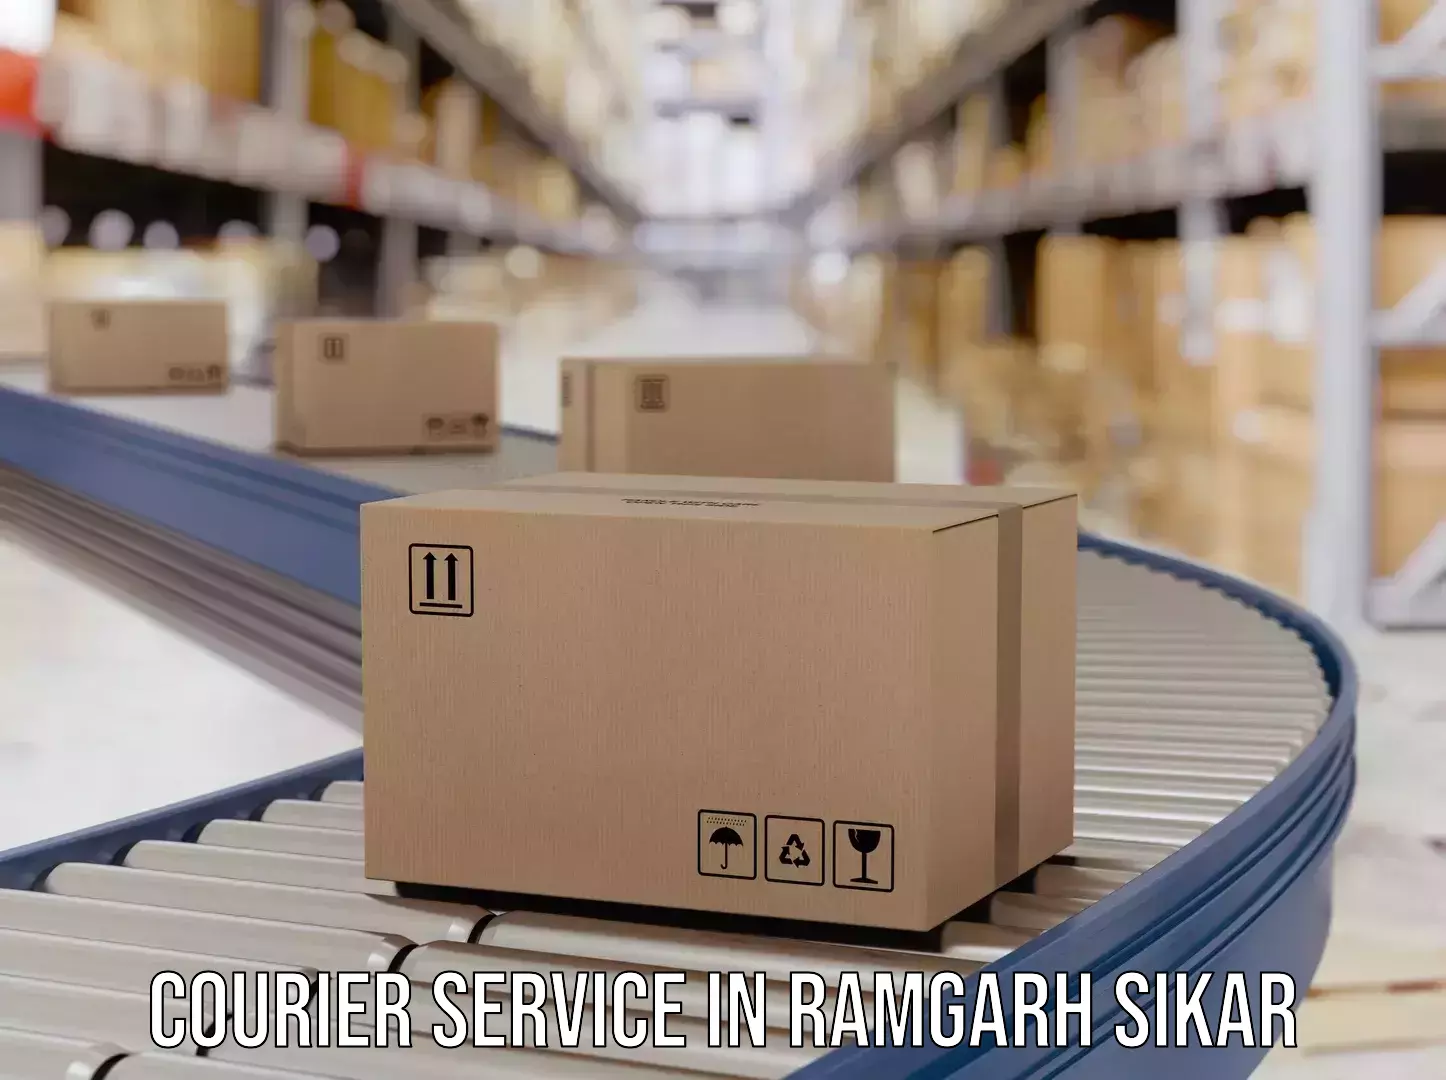 Parcel service for businesses in Ramgarh Sikar